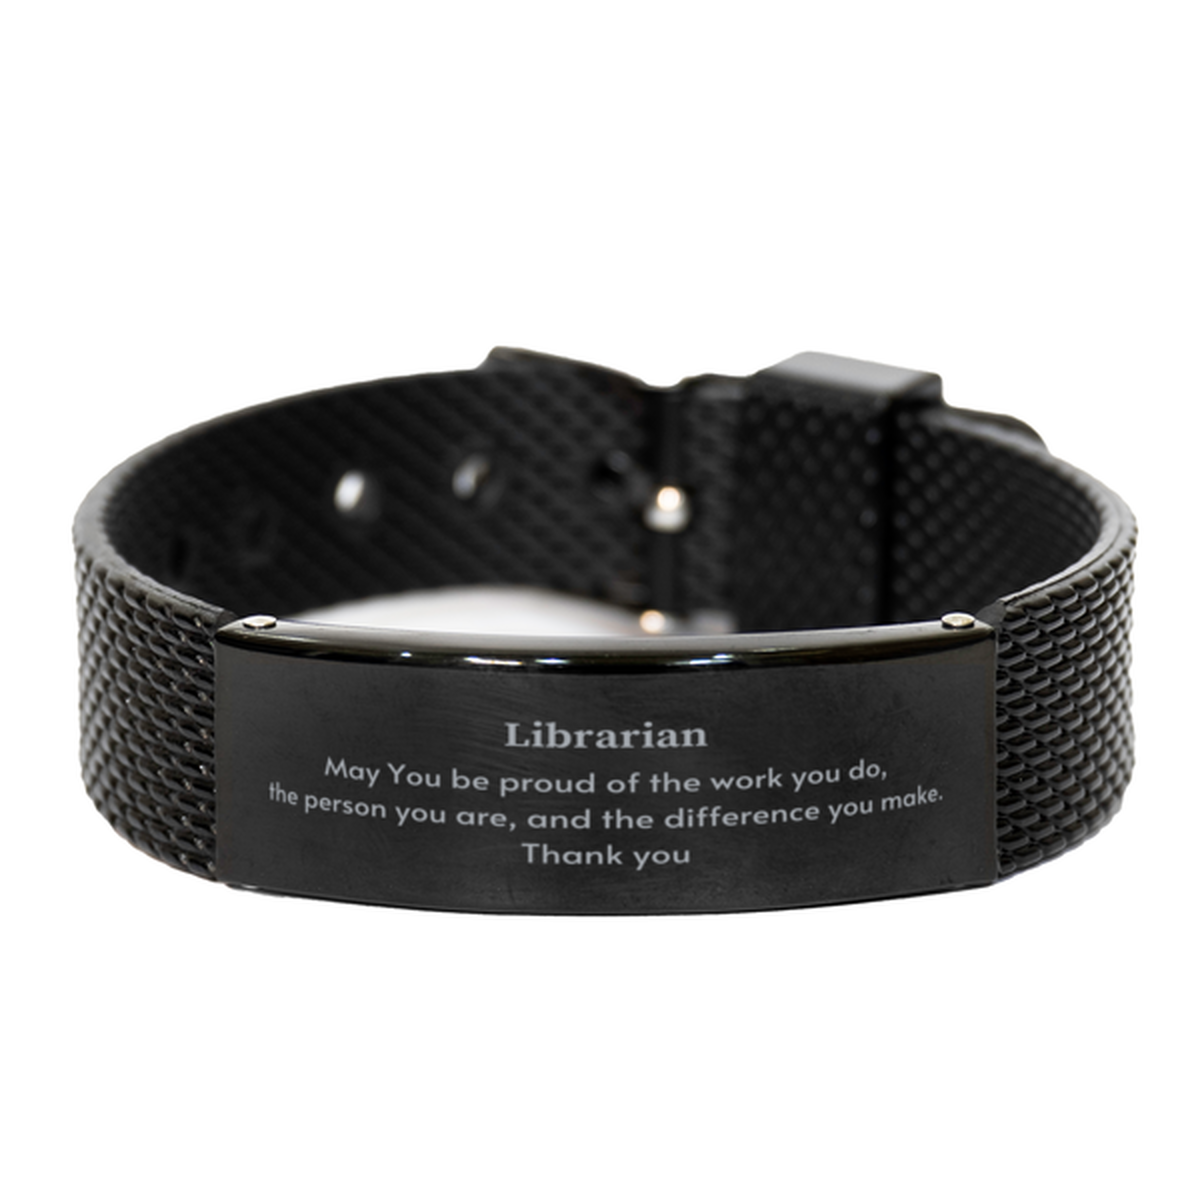 Heartwarming Black Shark Mesh Bracelet Retirement Coworkers Gifts for Librarian, Librarian May You be proud of the work you do, the person you are Gifts for Boss Men Women Friends